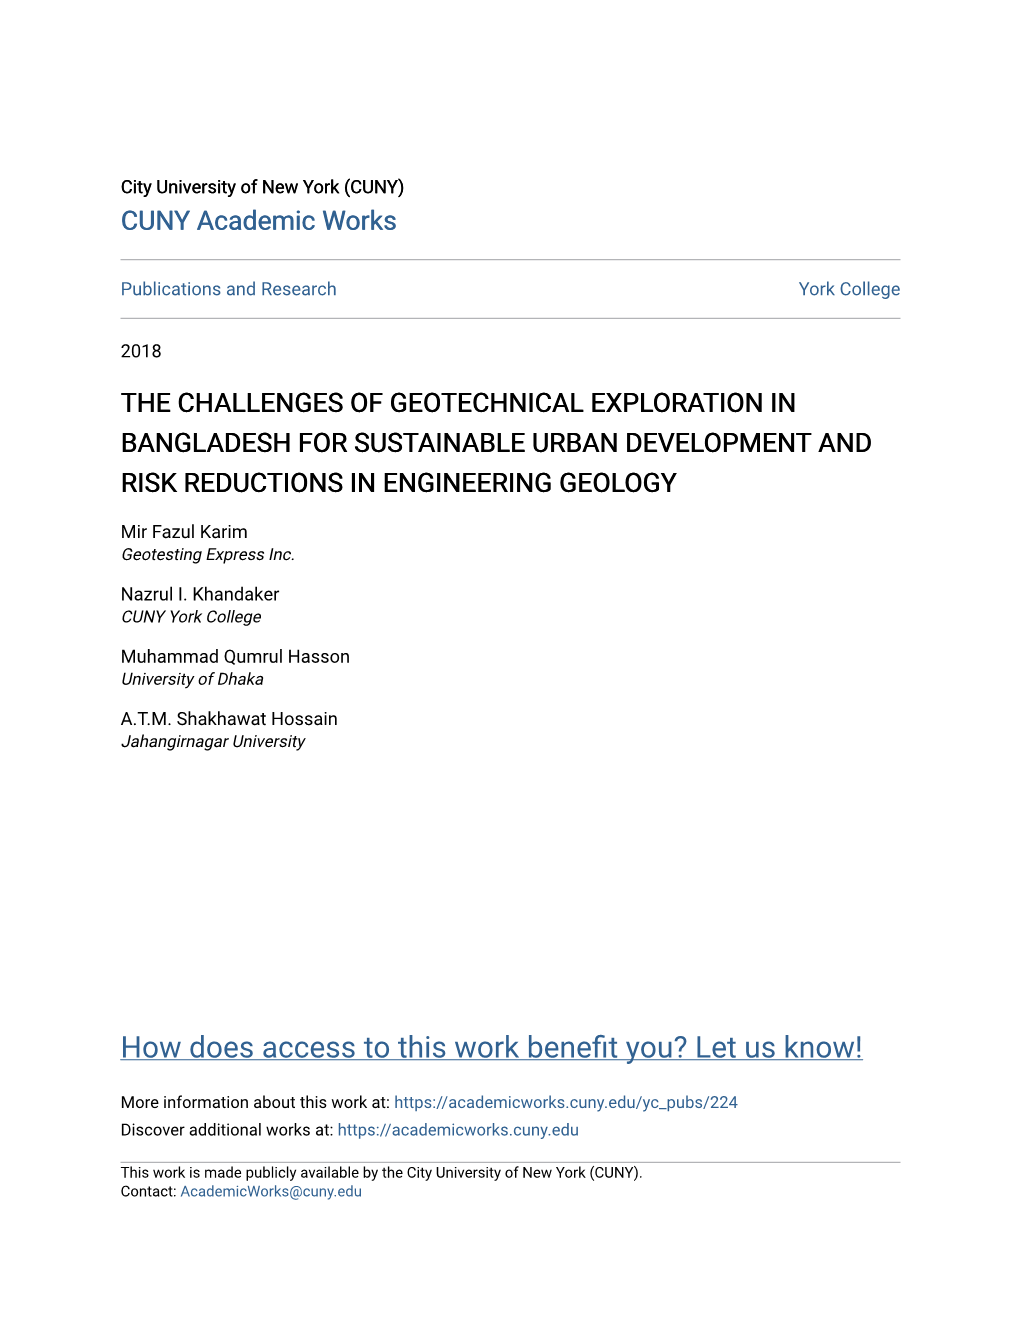 The Challenges of Geotechnical Exploration in Bangladesh for Sustainable Urban Development and Risk Reductions in Engineering Geology